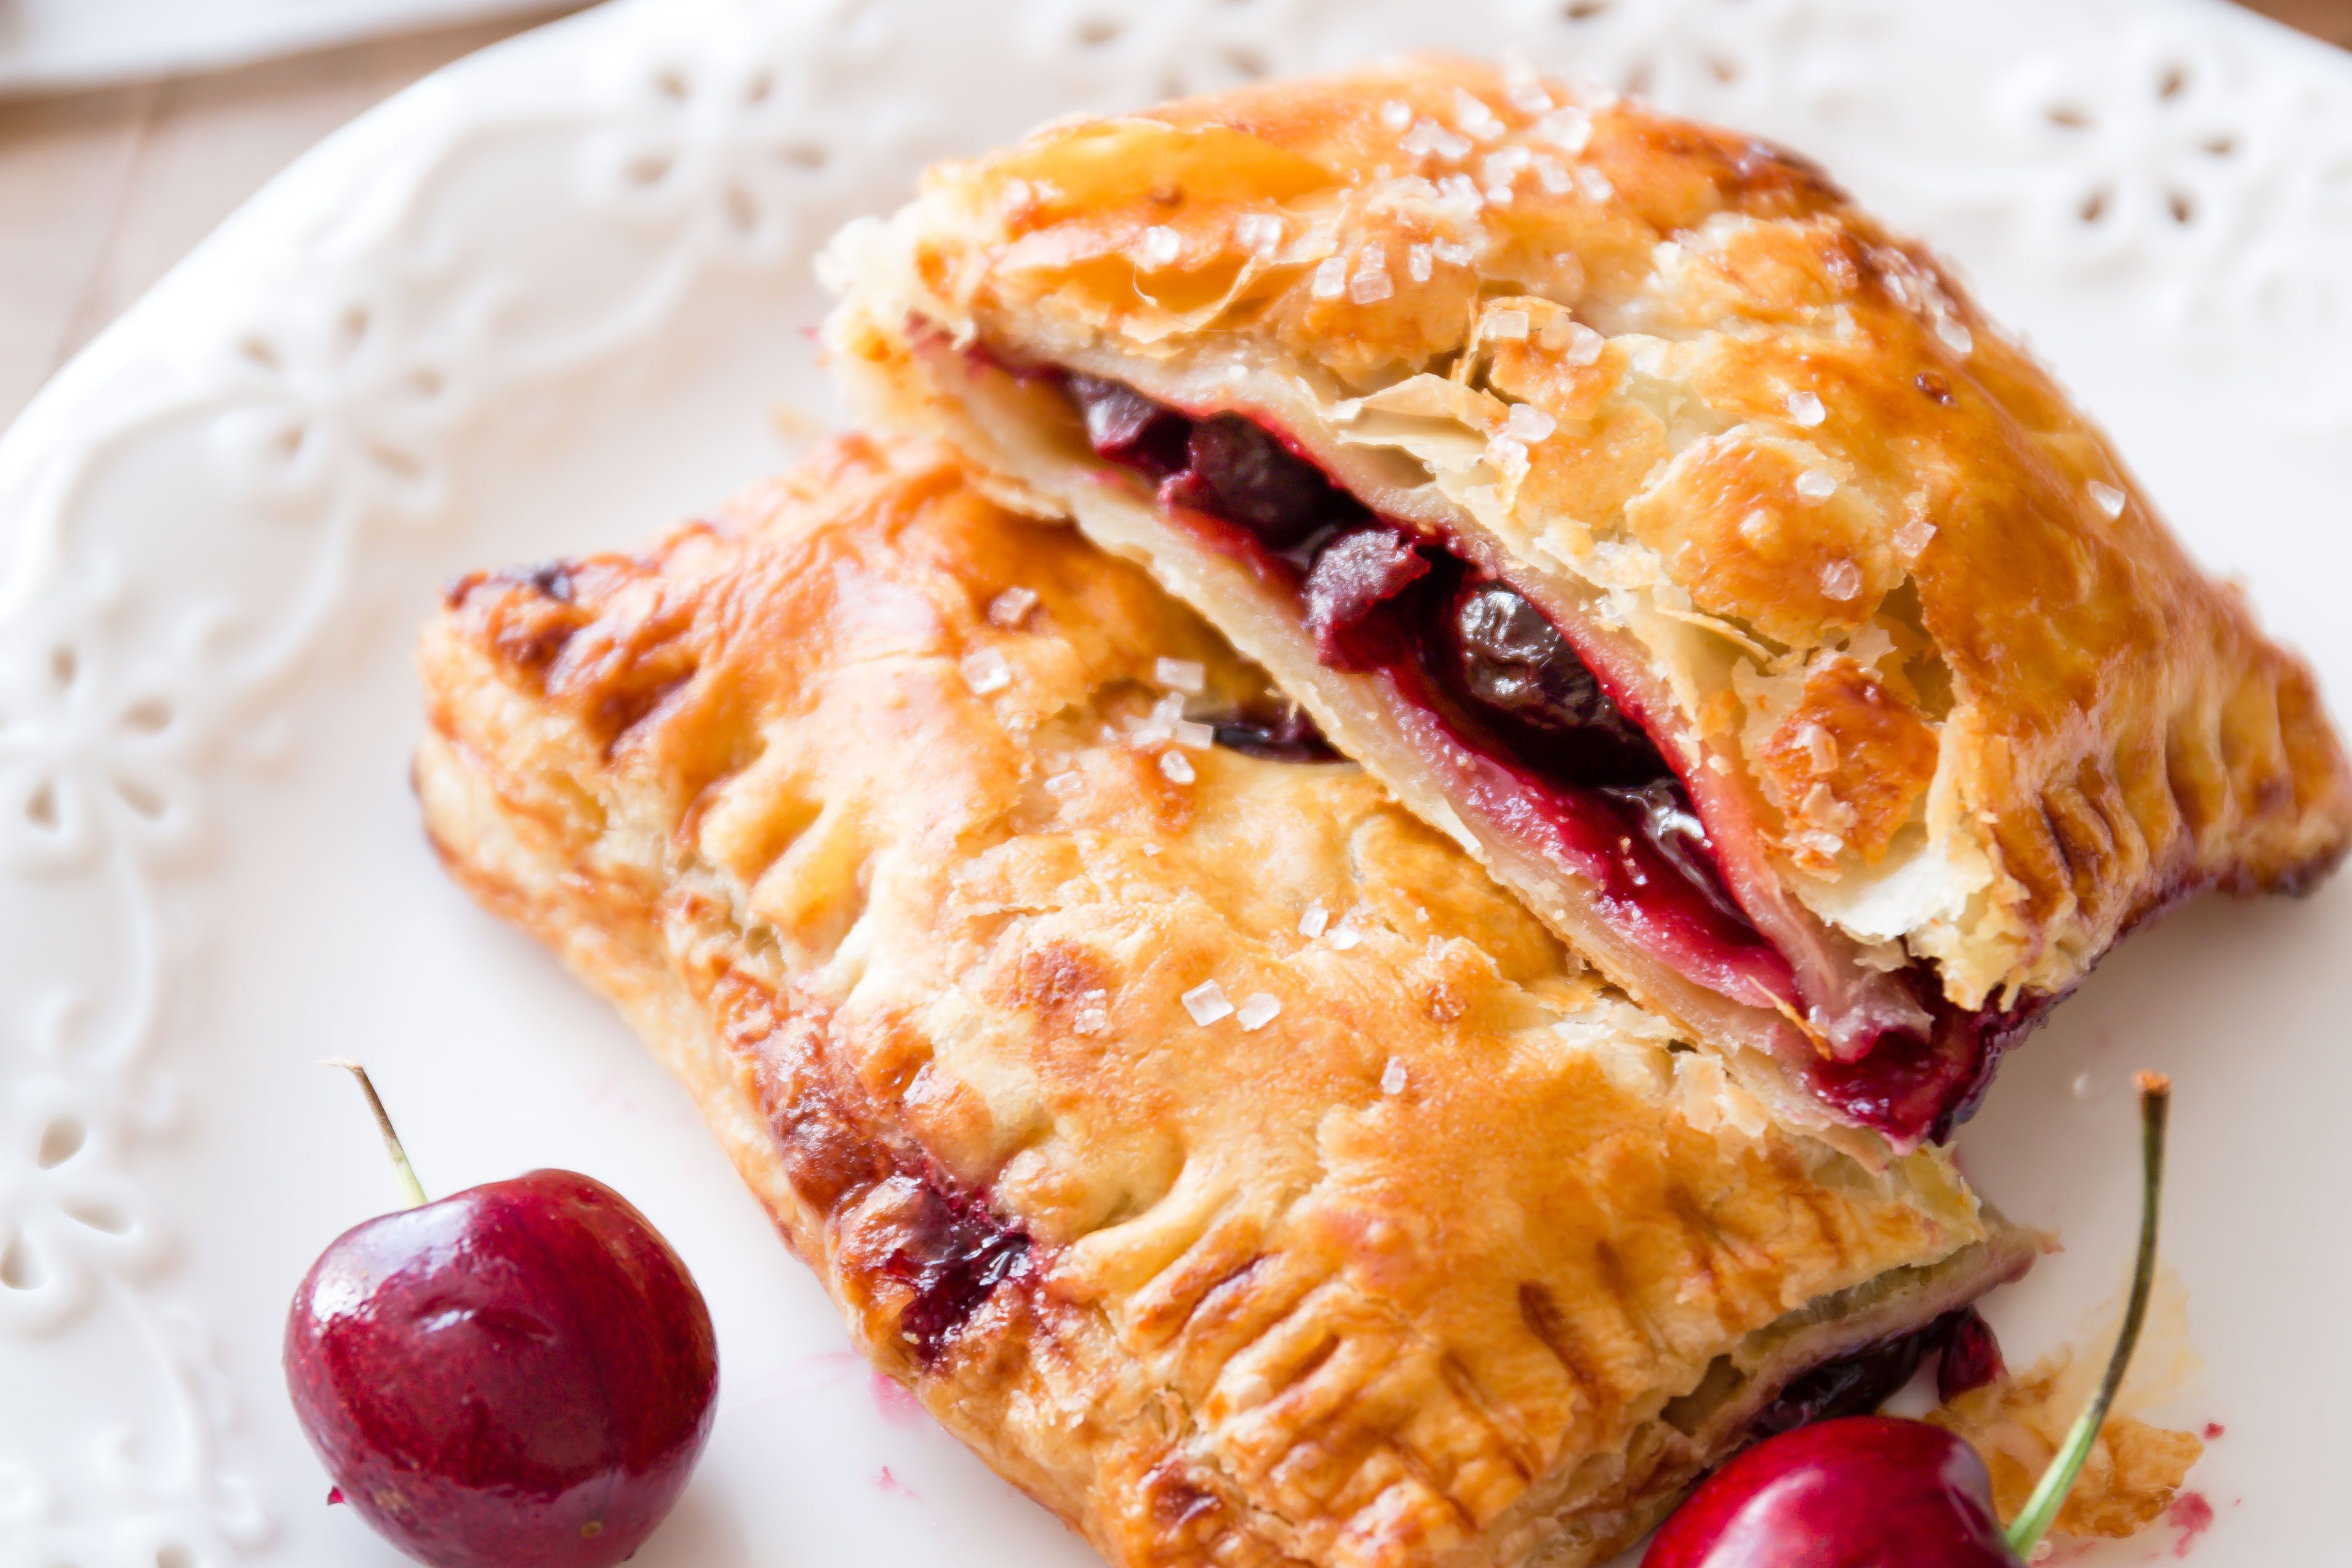 20+ Puff Pastry Recipes - Ideas For How To Use Puff Pastry - Delish.com